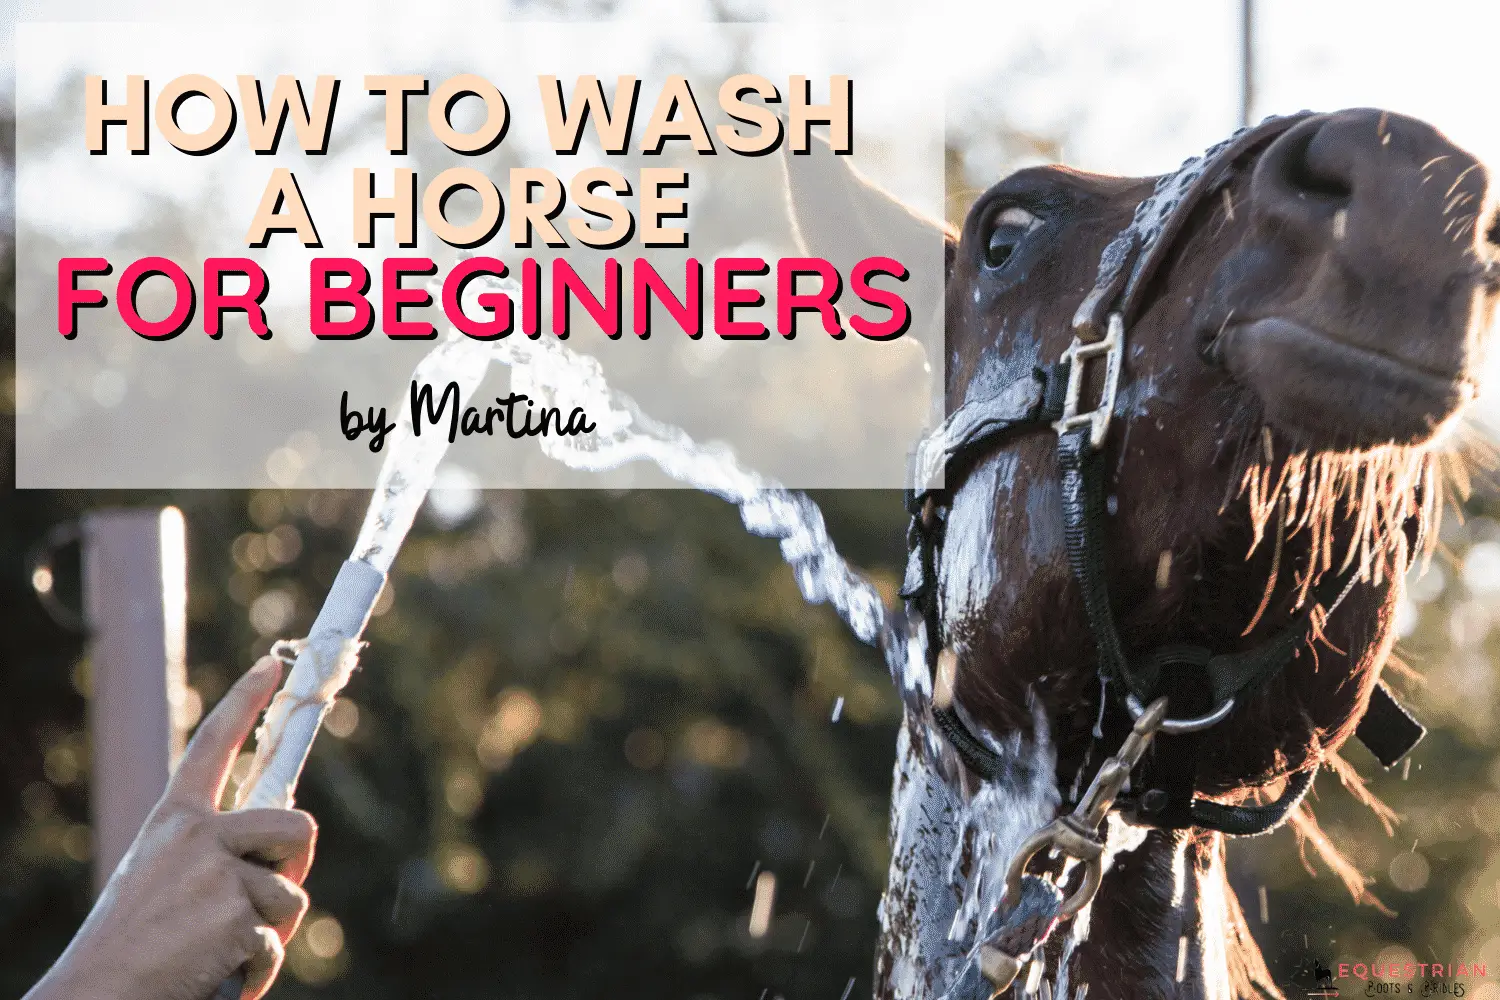 How to Wash a Horse for Beginners